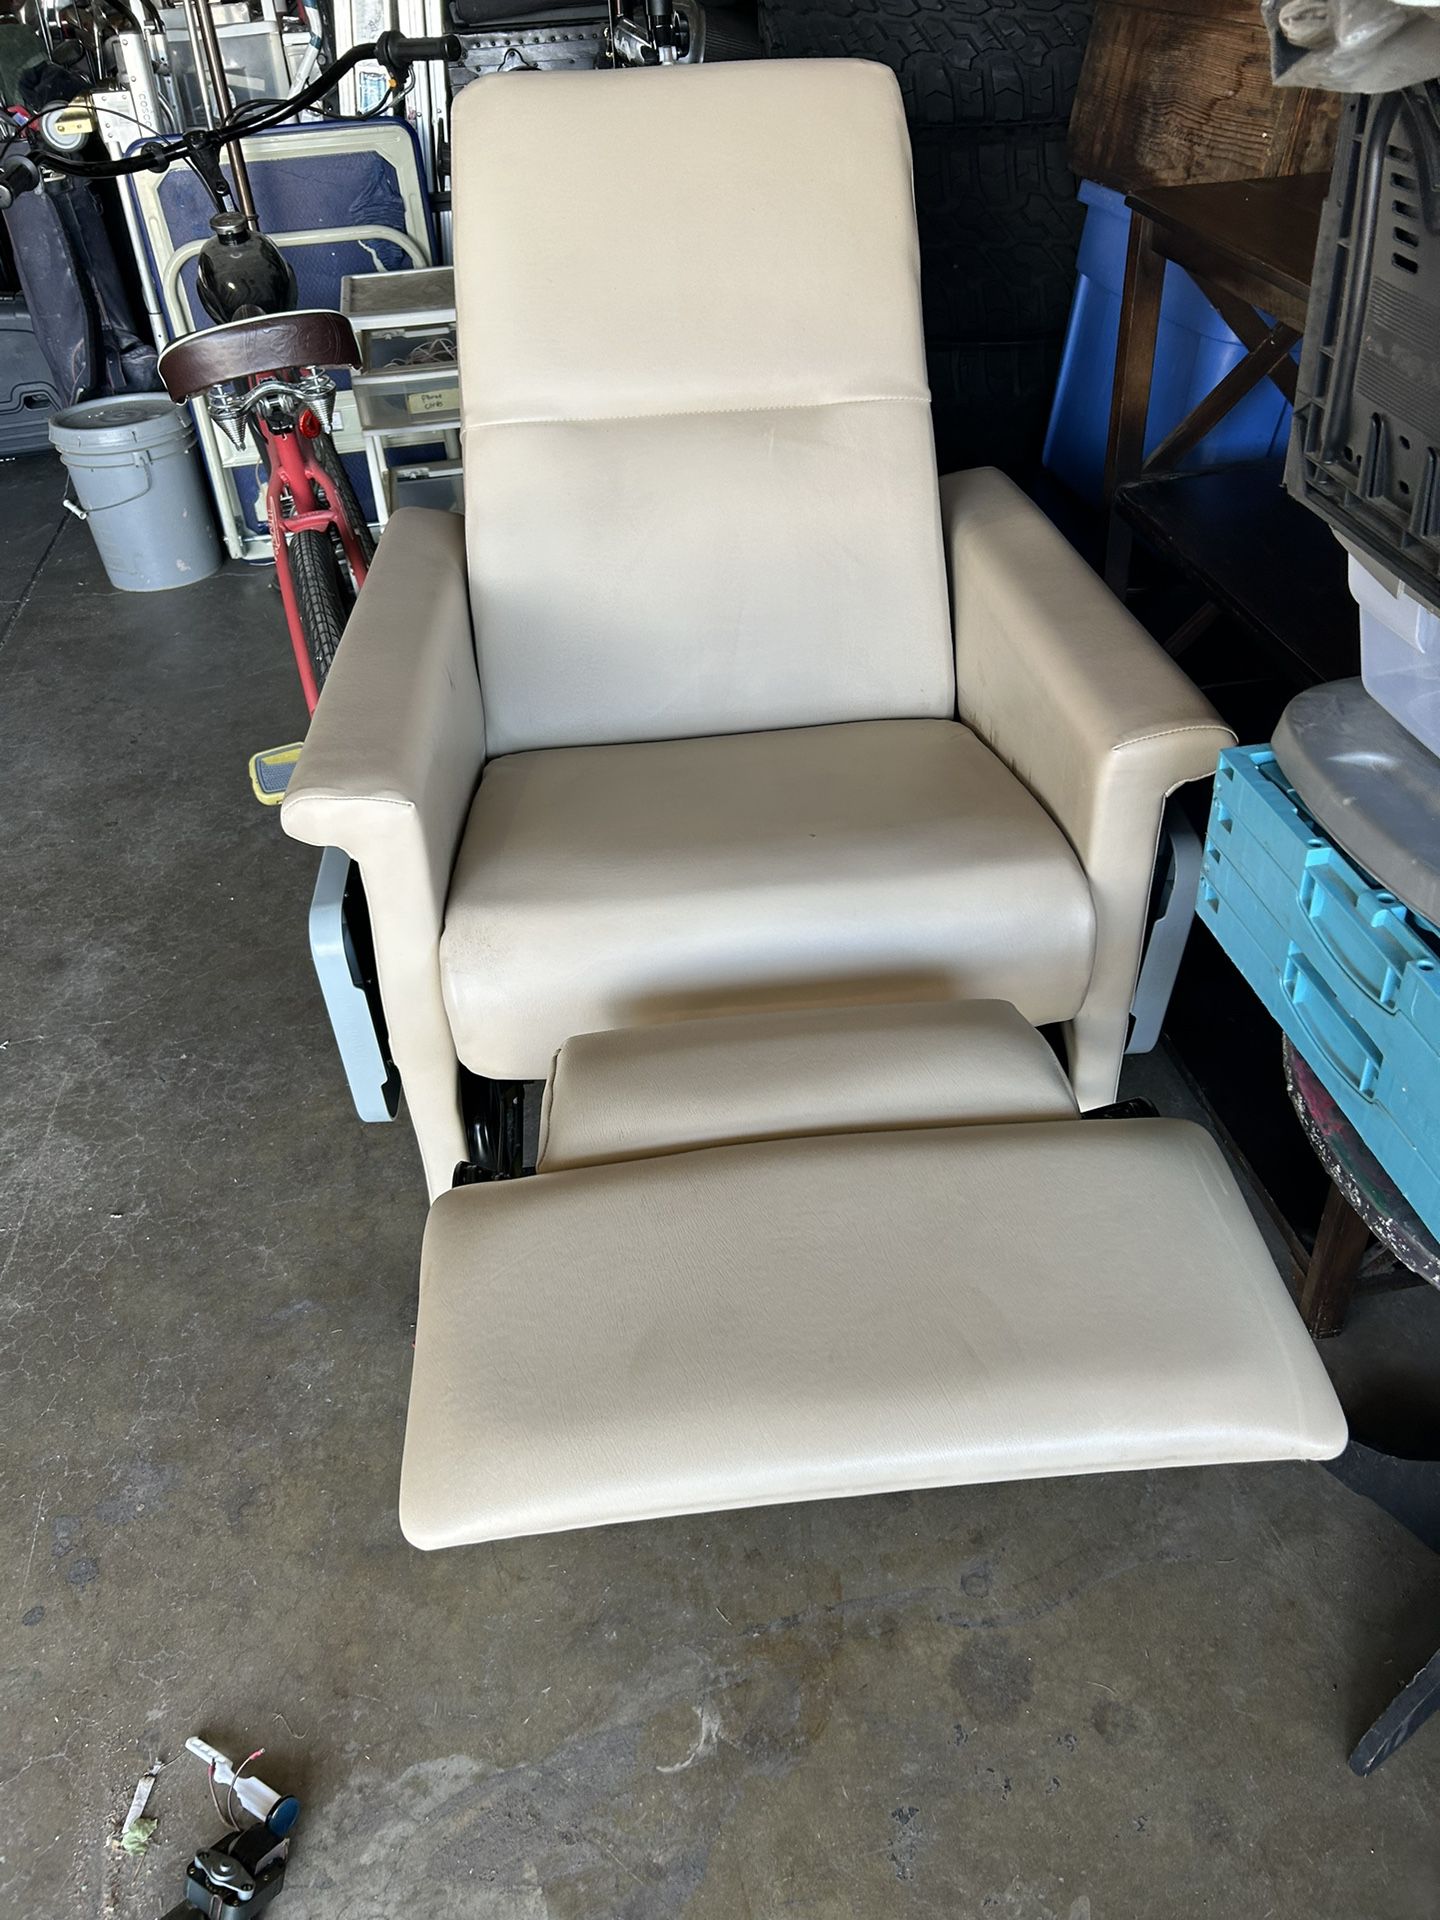 Recliner on casters with push bar and side tables